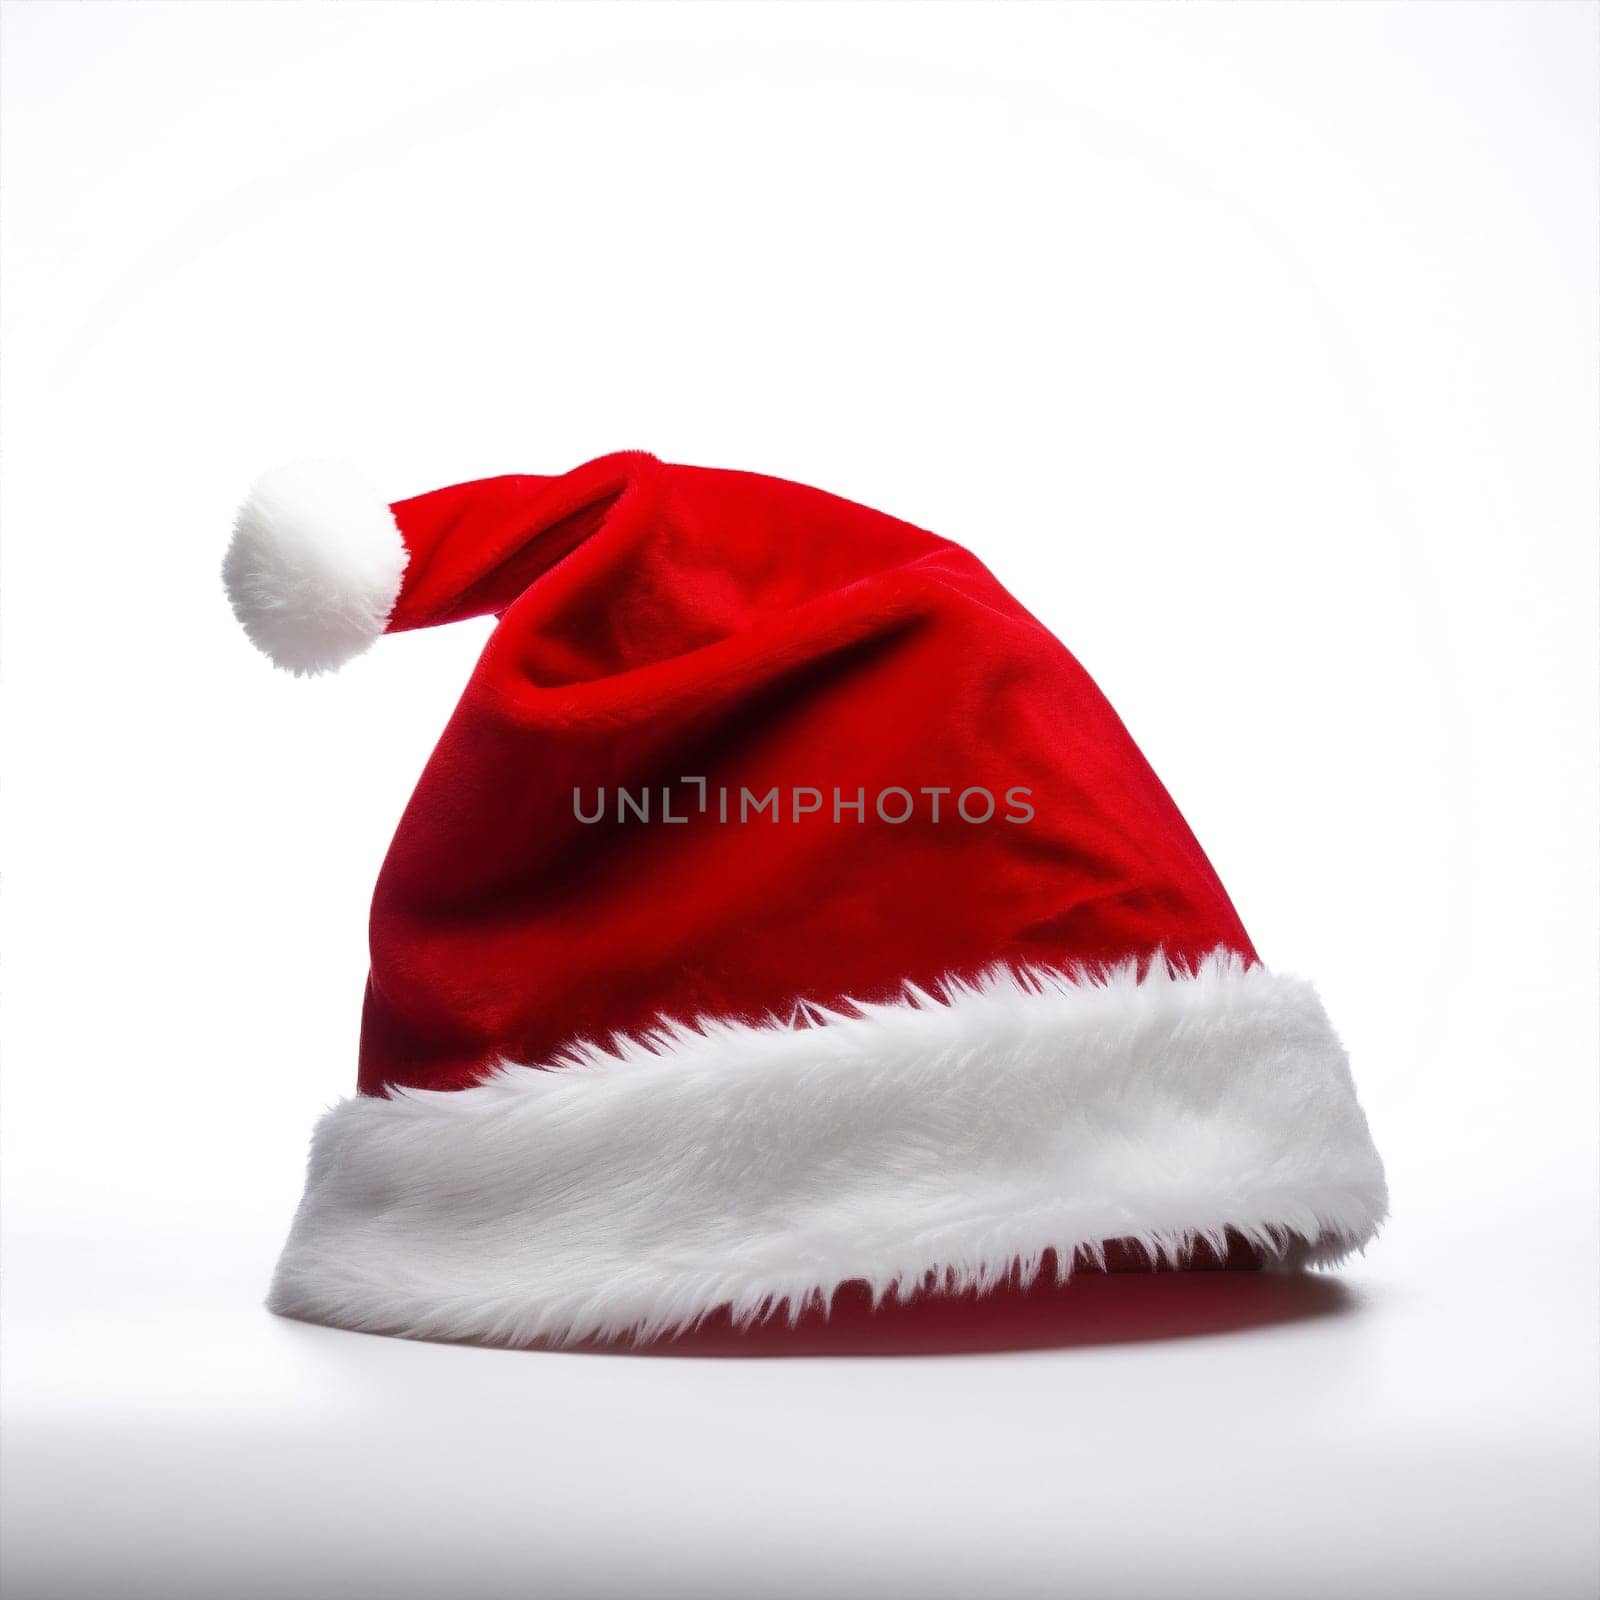 Claus santa symbol costume claus fur cap christmas hat xmas object decoration red december seasonal background isolated santa winter tradition celebrate holiday white new